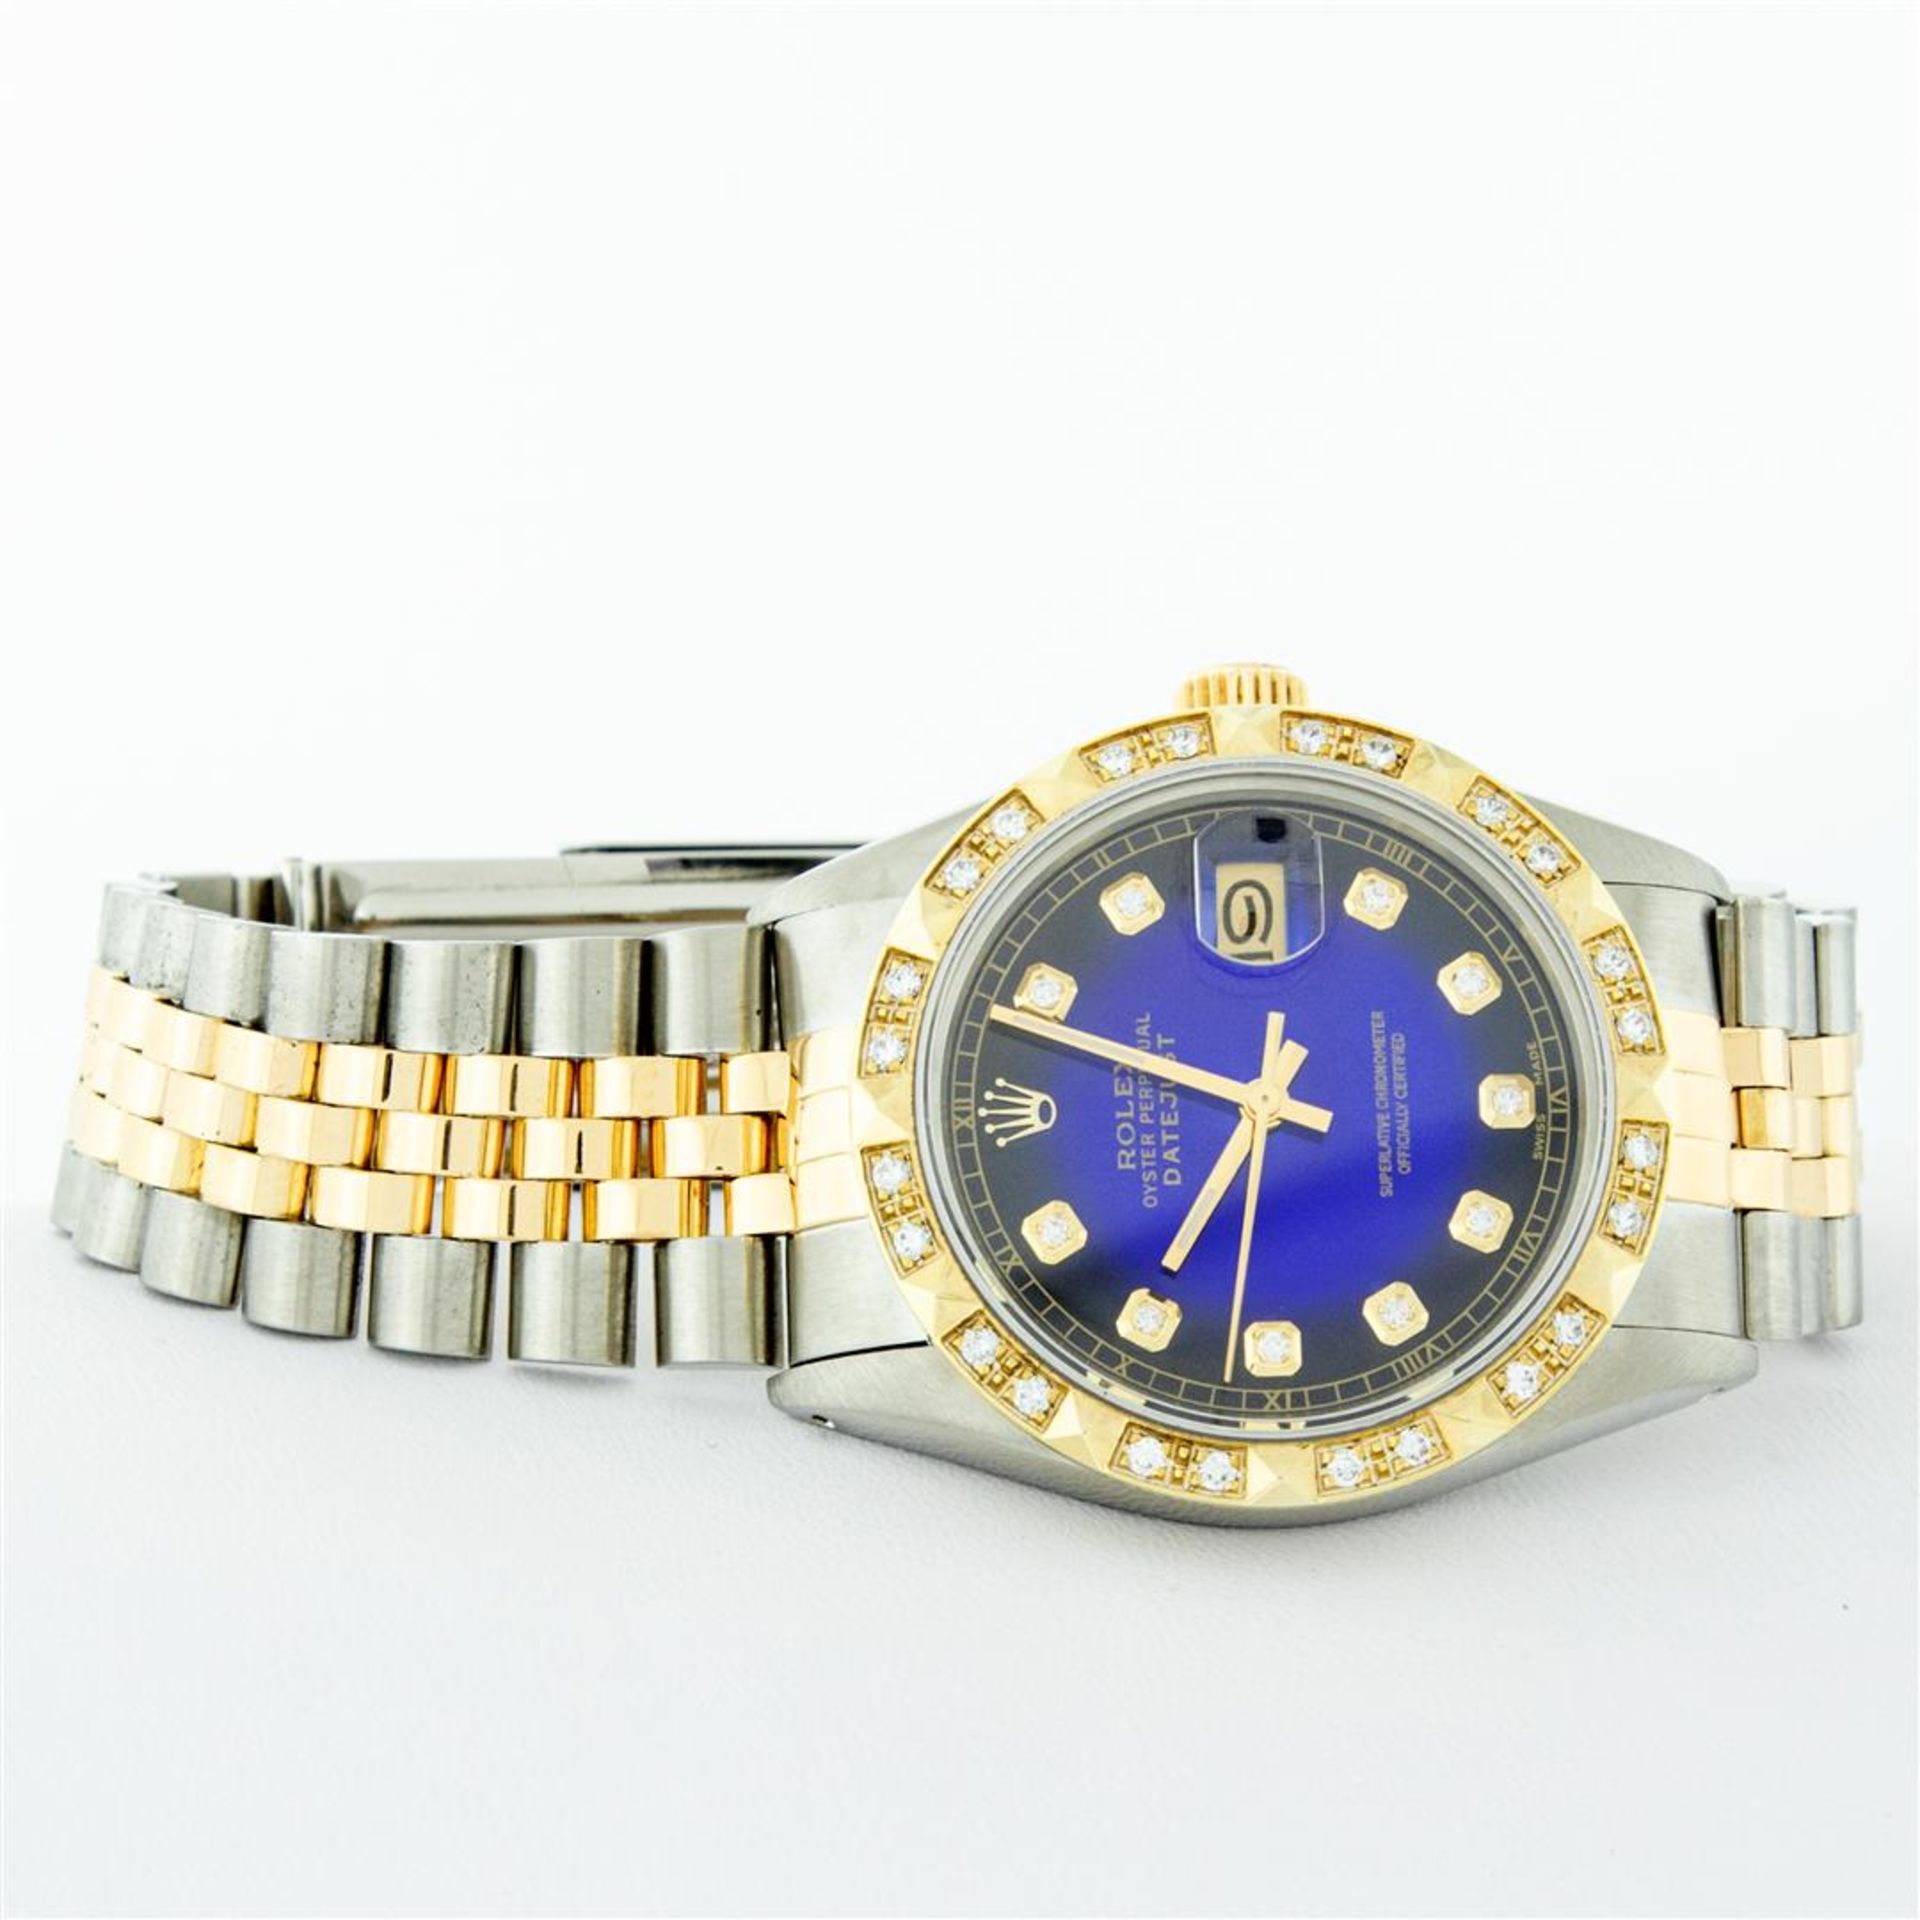 Rolex 2T Blue Vignette Pyramid Diamond Oyster Perpetual Datejust 36MM - Image 4 of 9